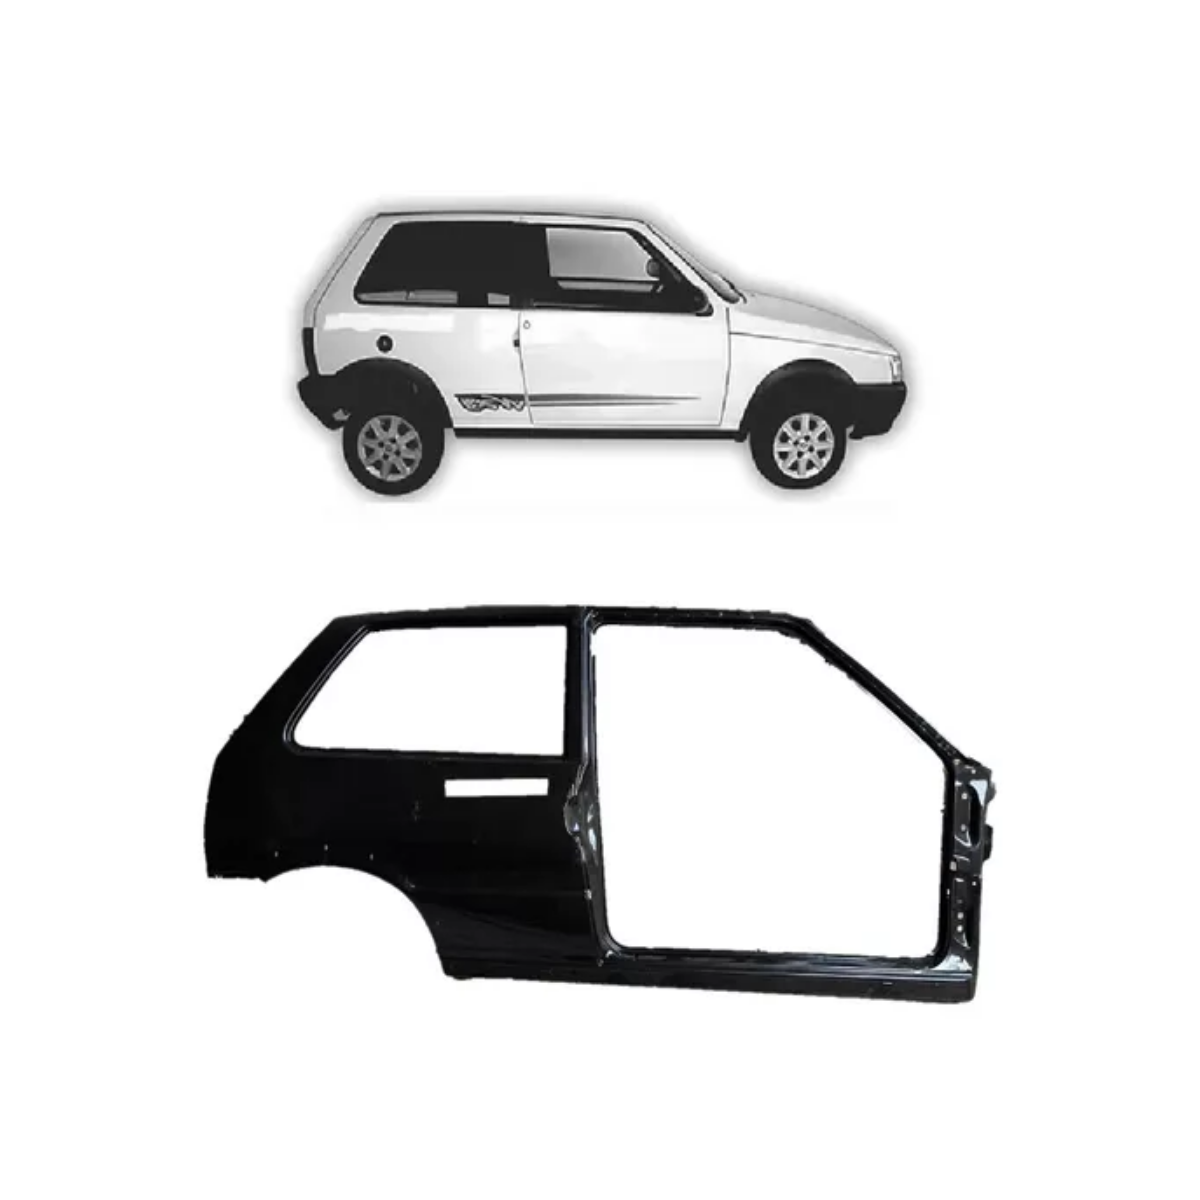 Folha Remendo Lateral Fiat Uno Way Mille 2004/2013 51766247